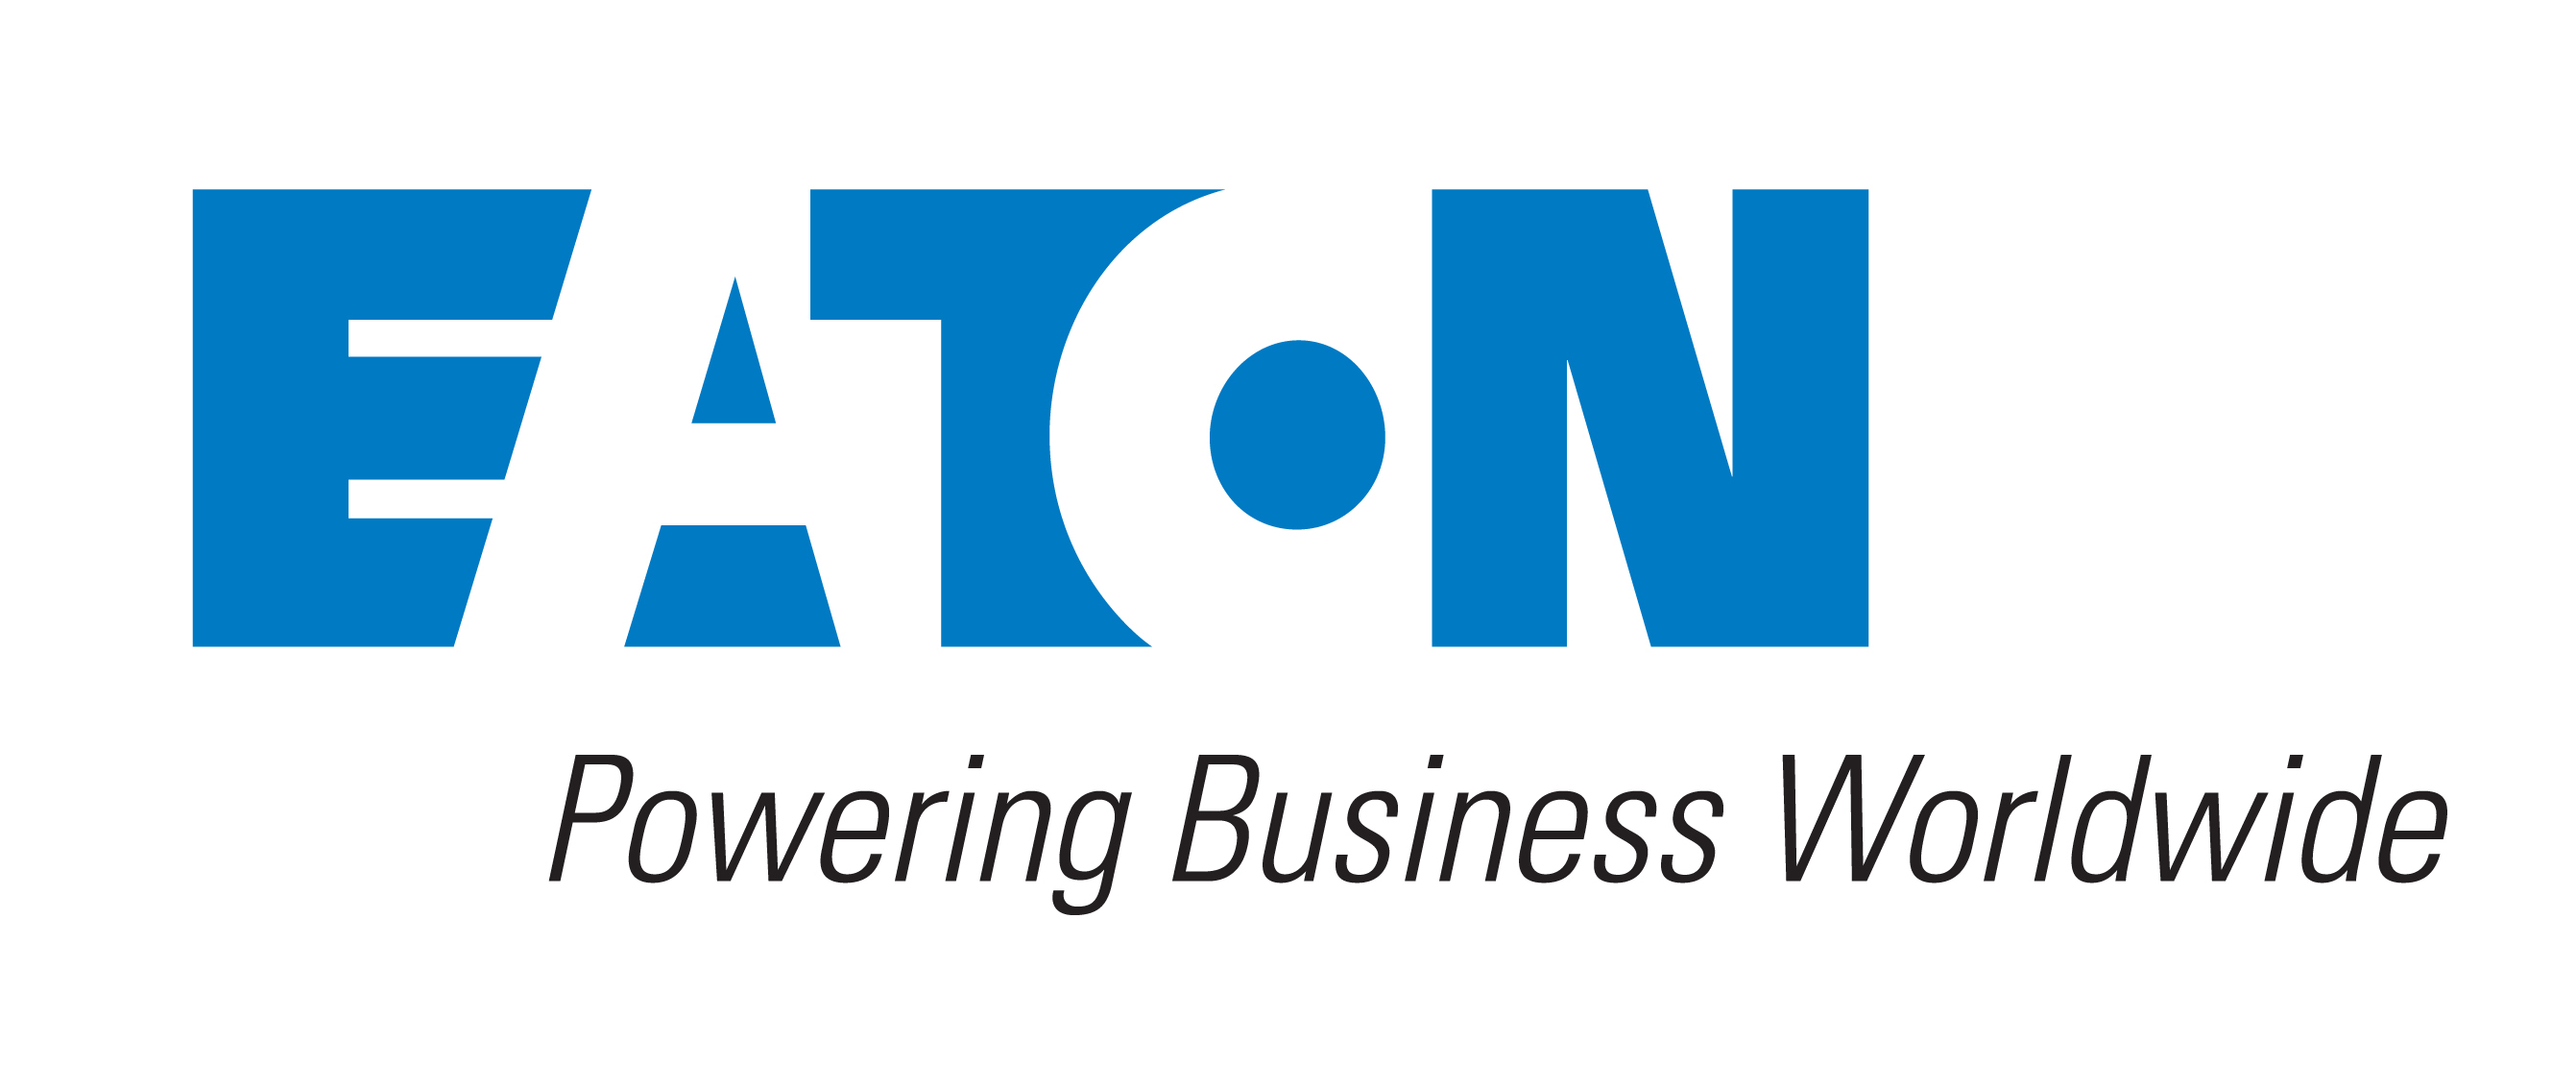 Eaton Takes Aim at Vehicle Electrification Market with New eMobility